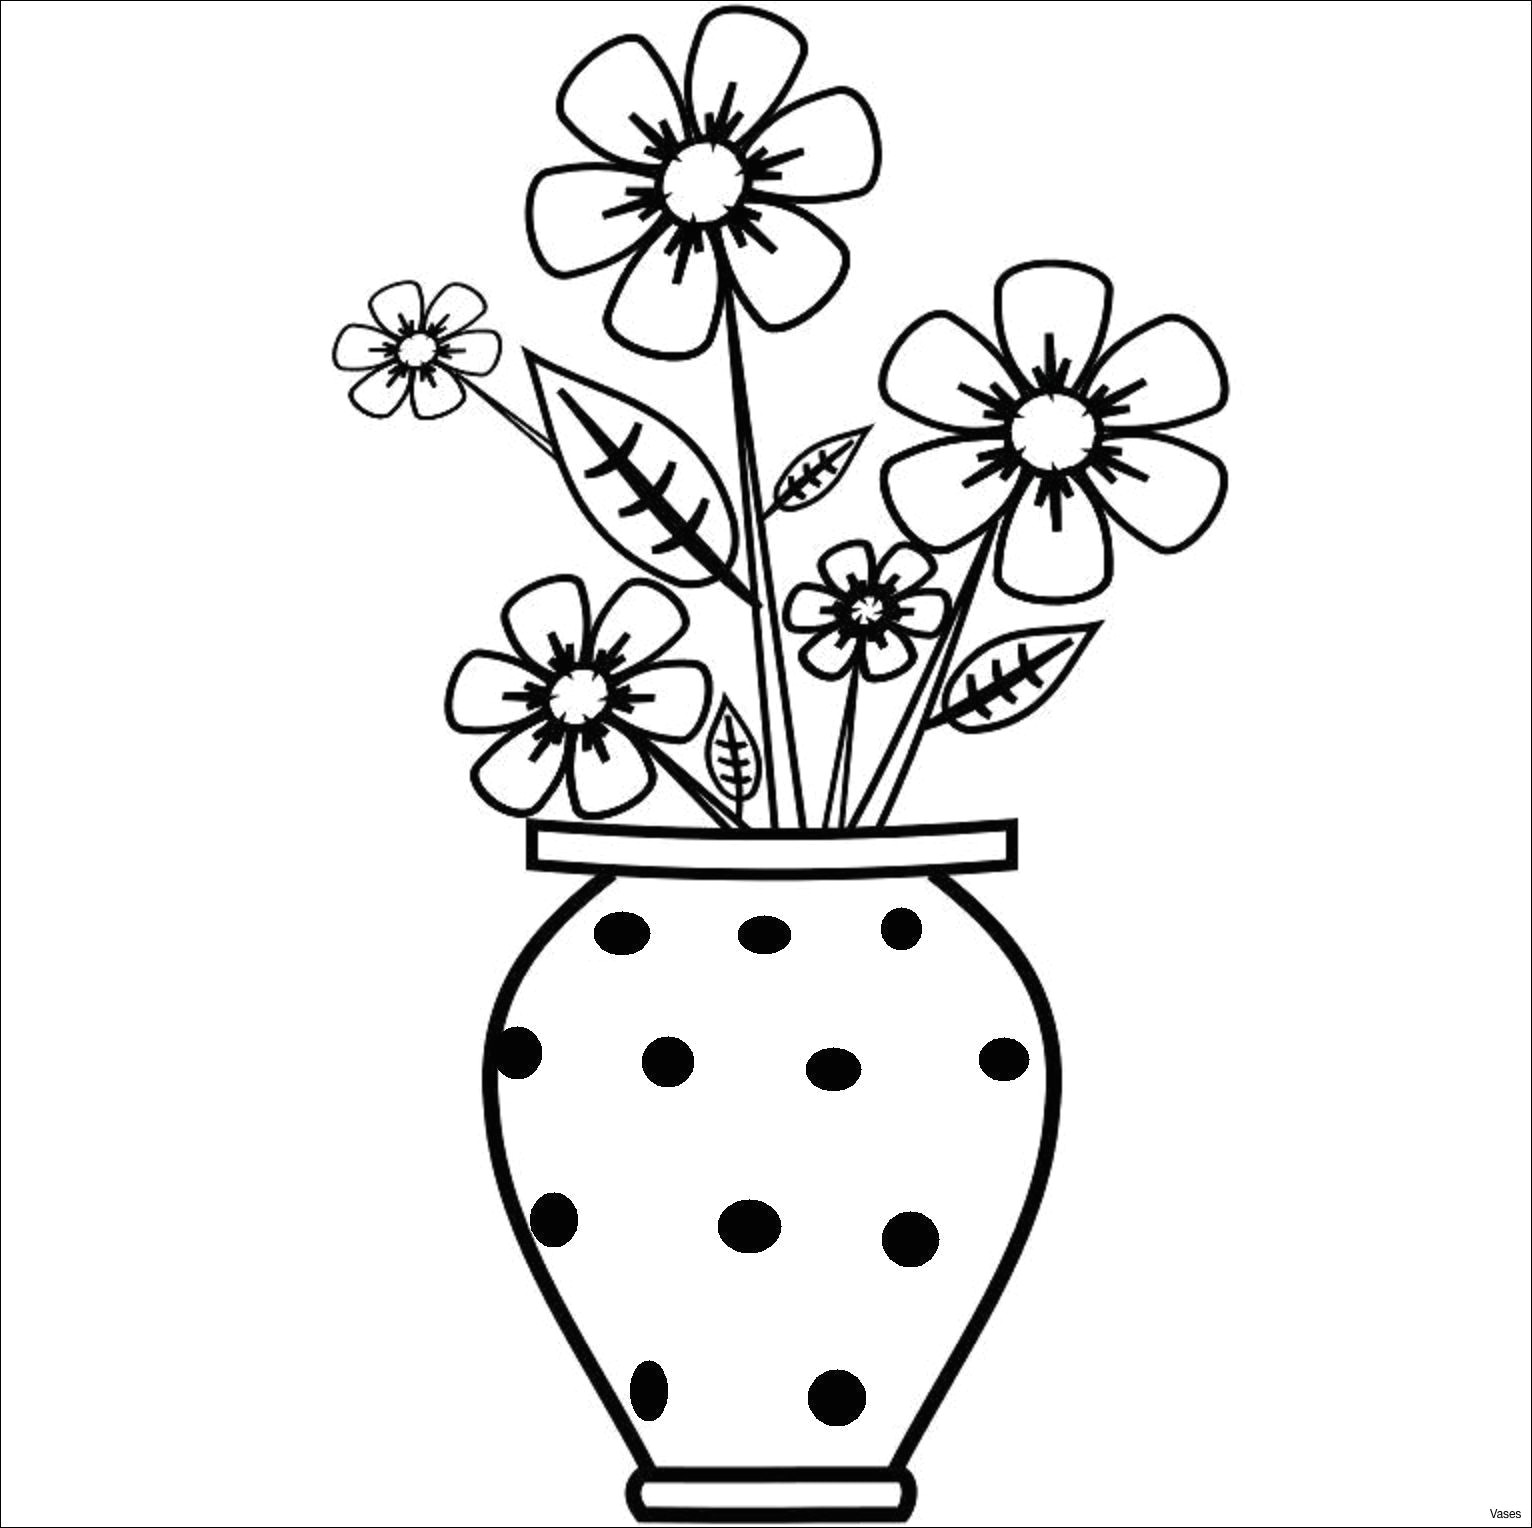 Drawings Of Flower Pot Pics Of Drawings Easy Vase Art Drawings How to Draw A Vase Step 2h